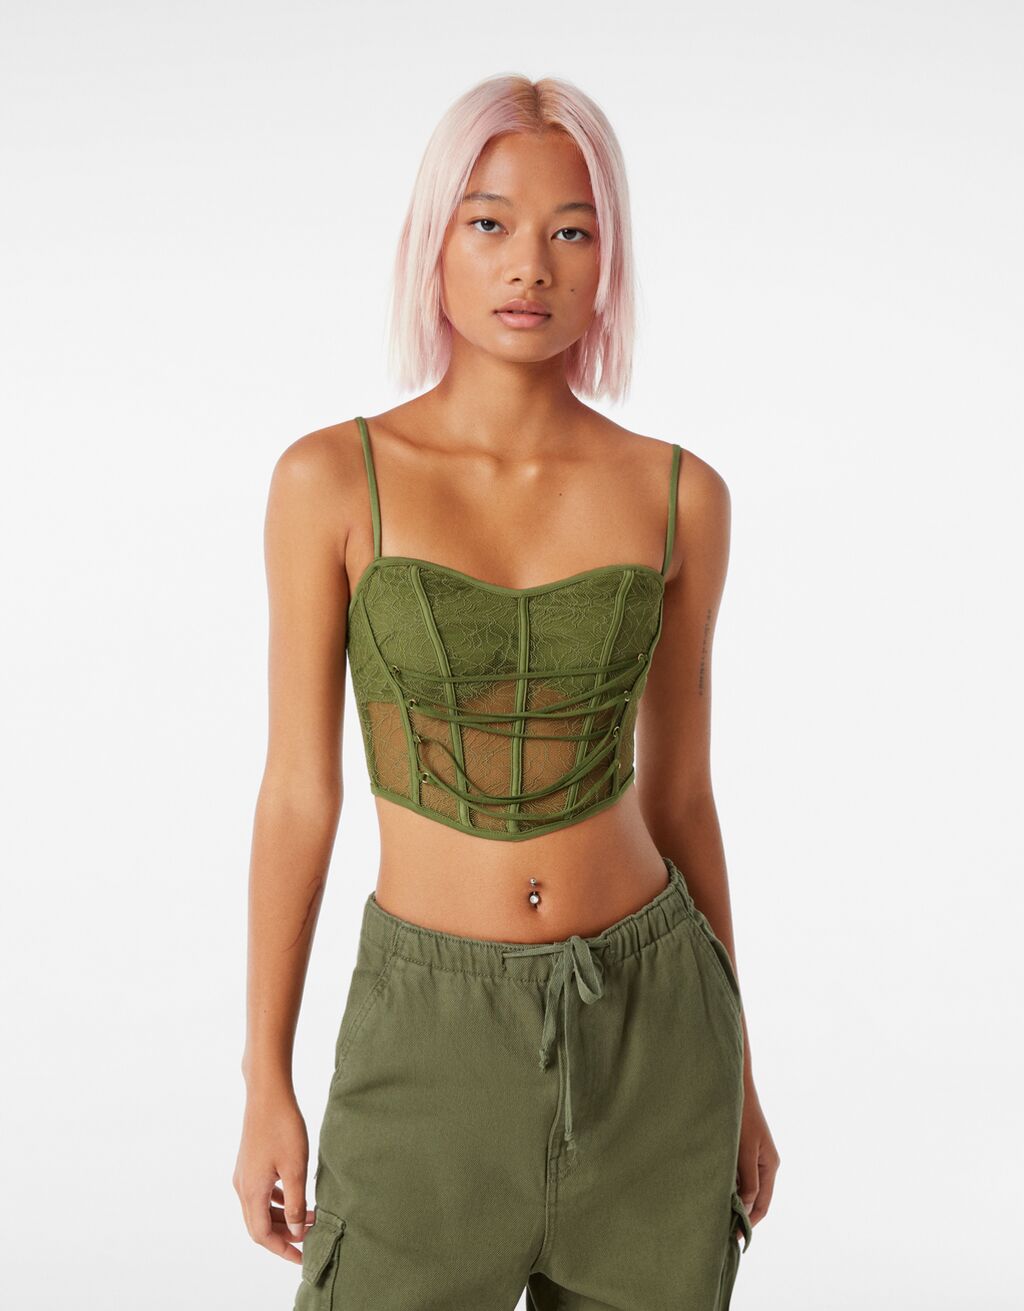 Strappy corset top with lace